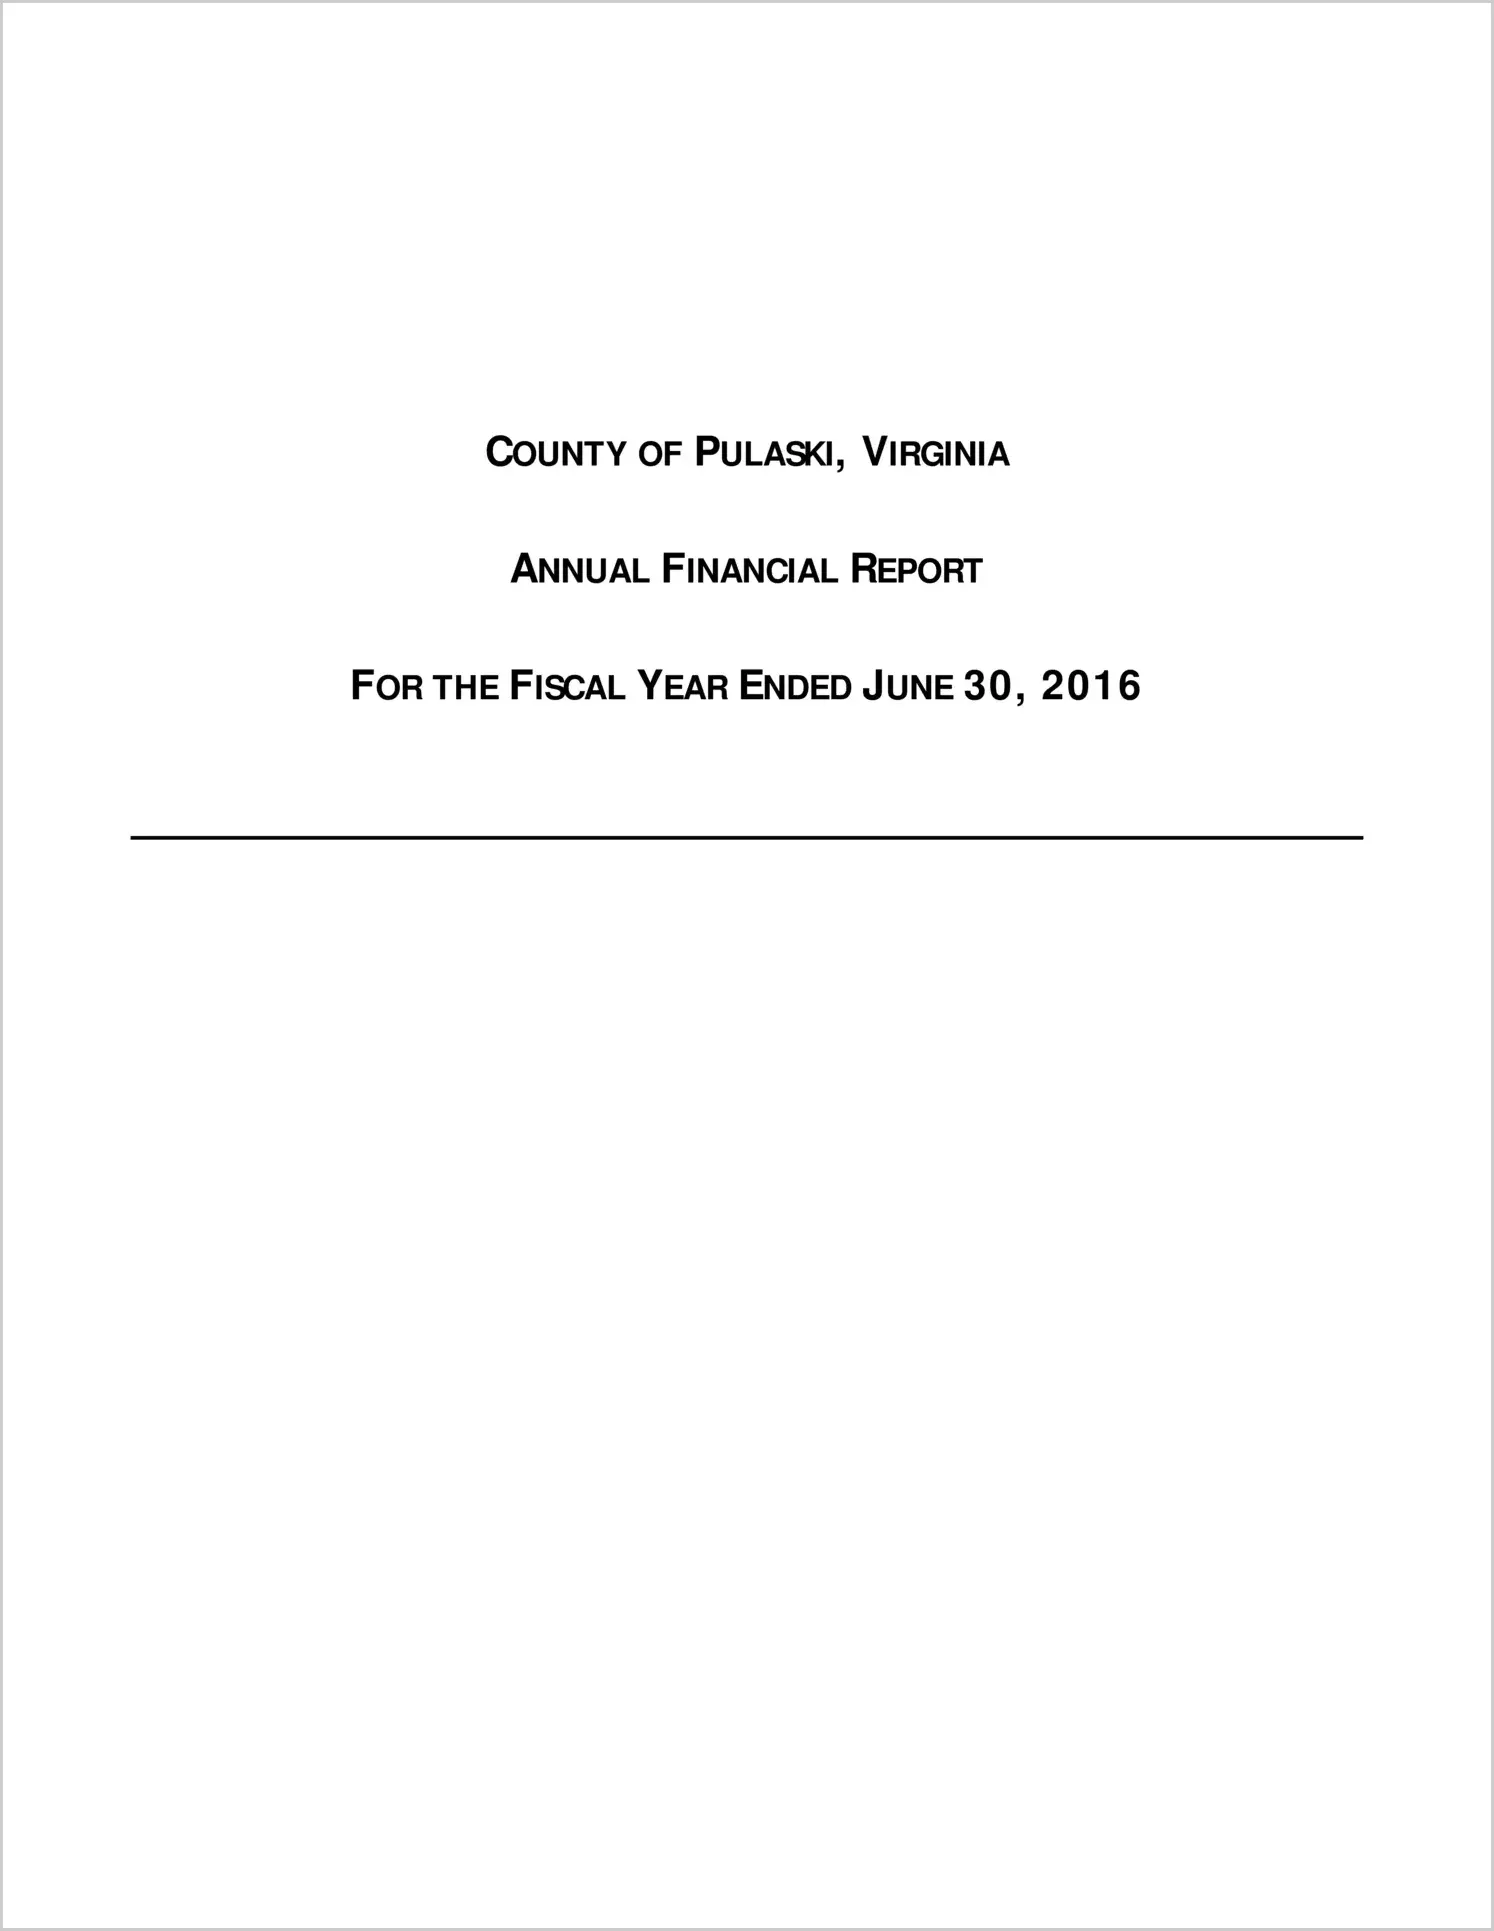 2016 Annual Financial Report for County of Pulaski